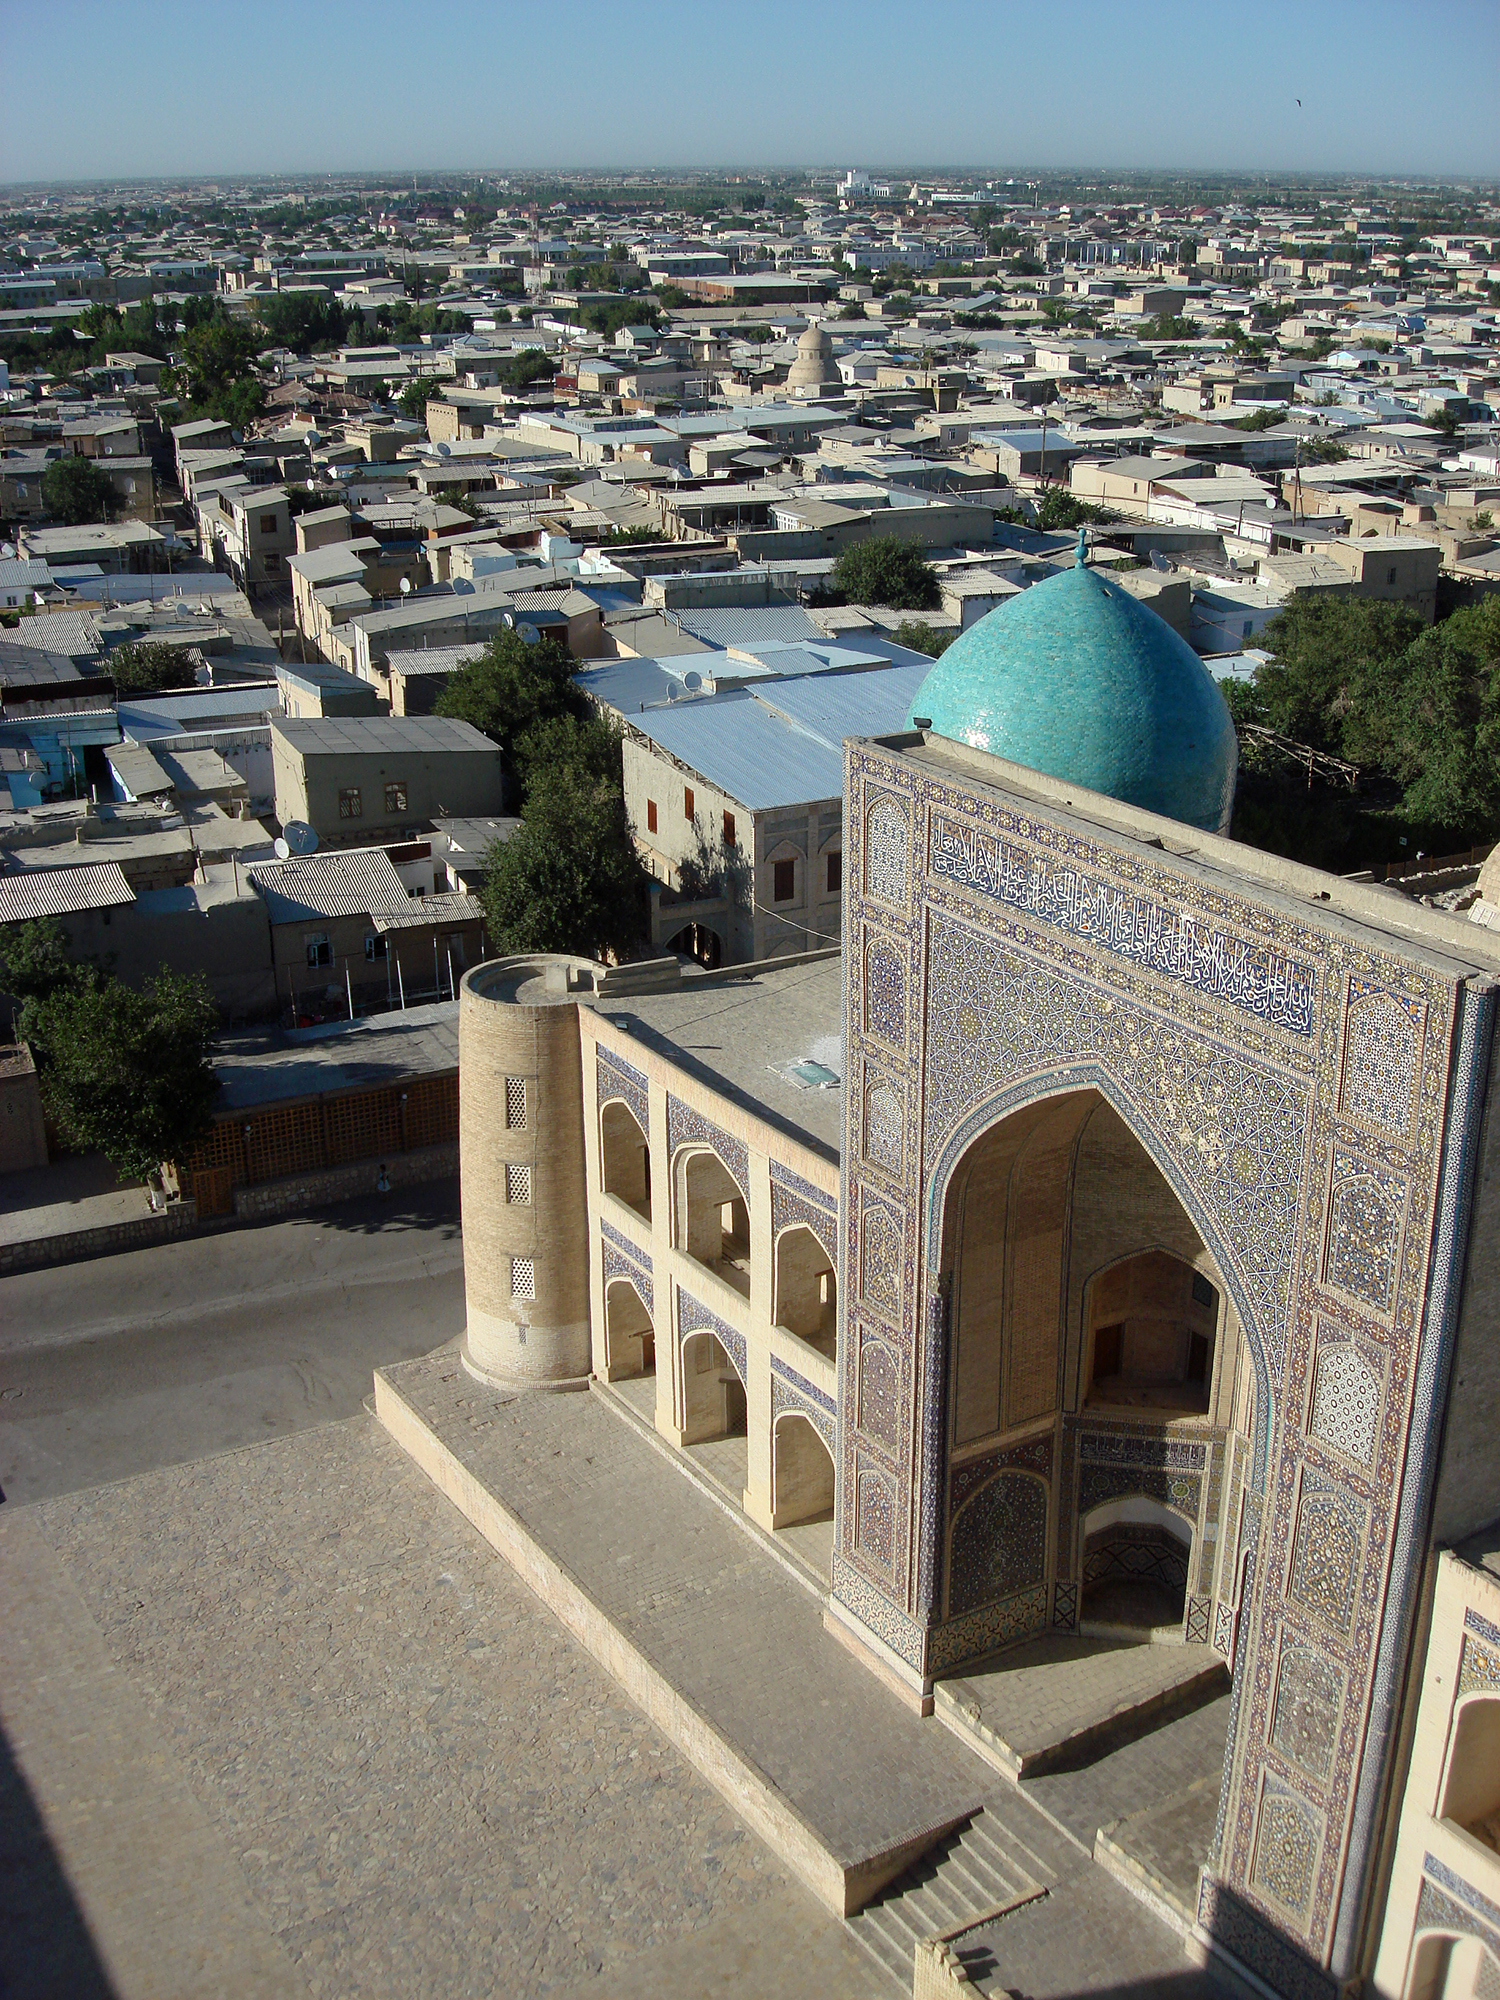 Panoramic view of Bukhara (current state)